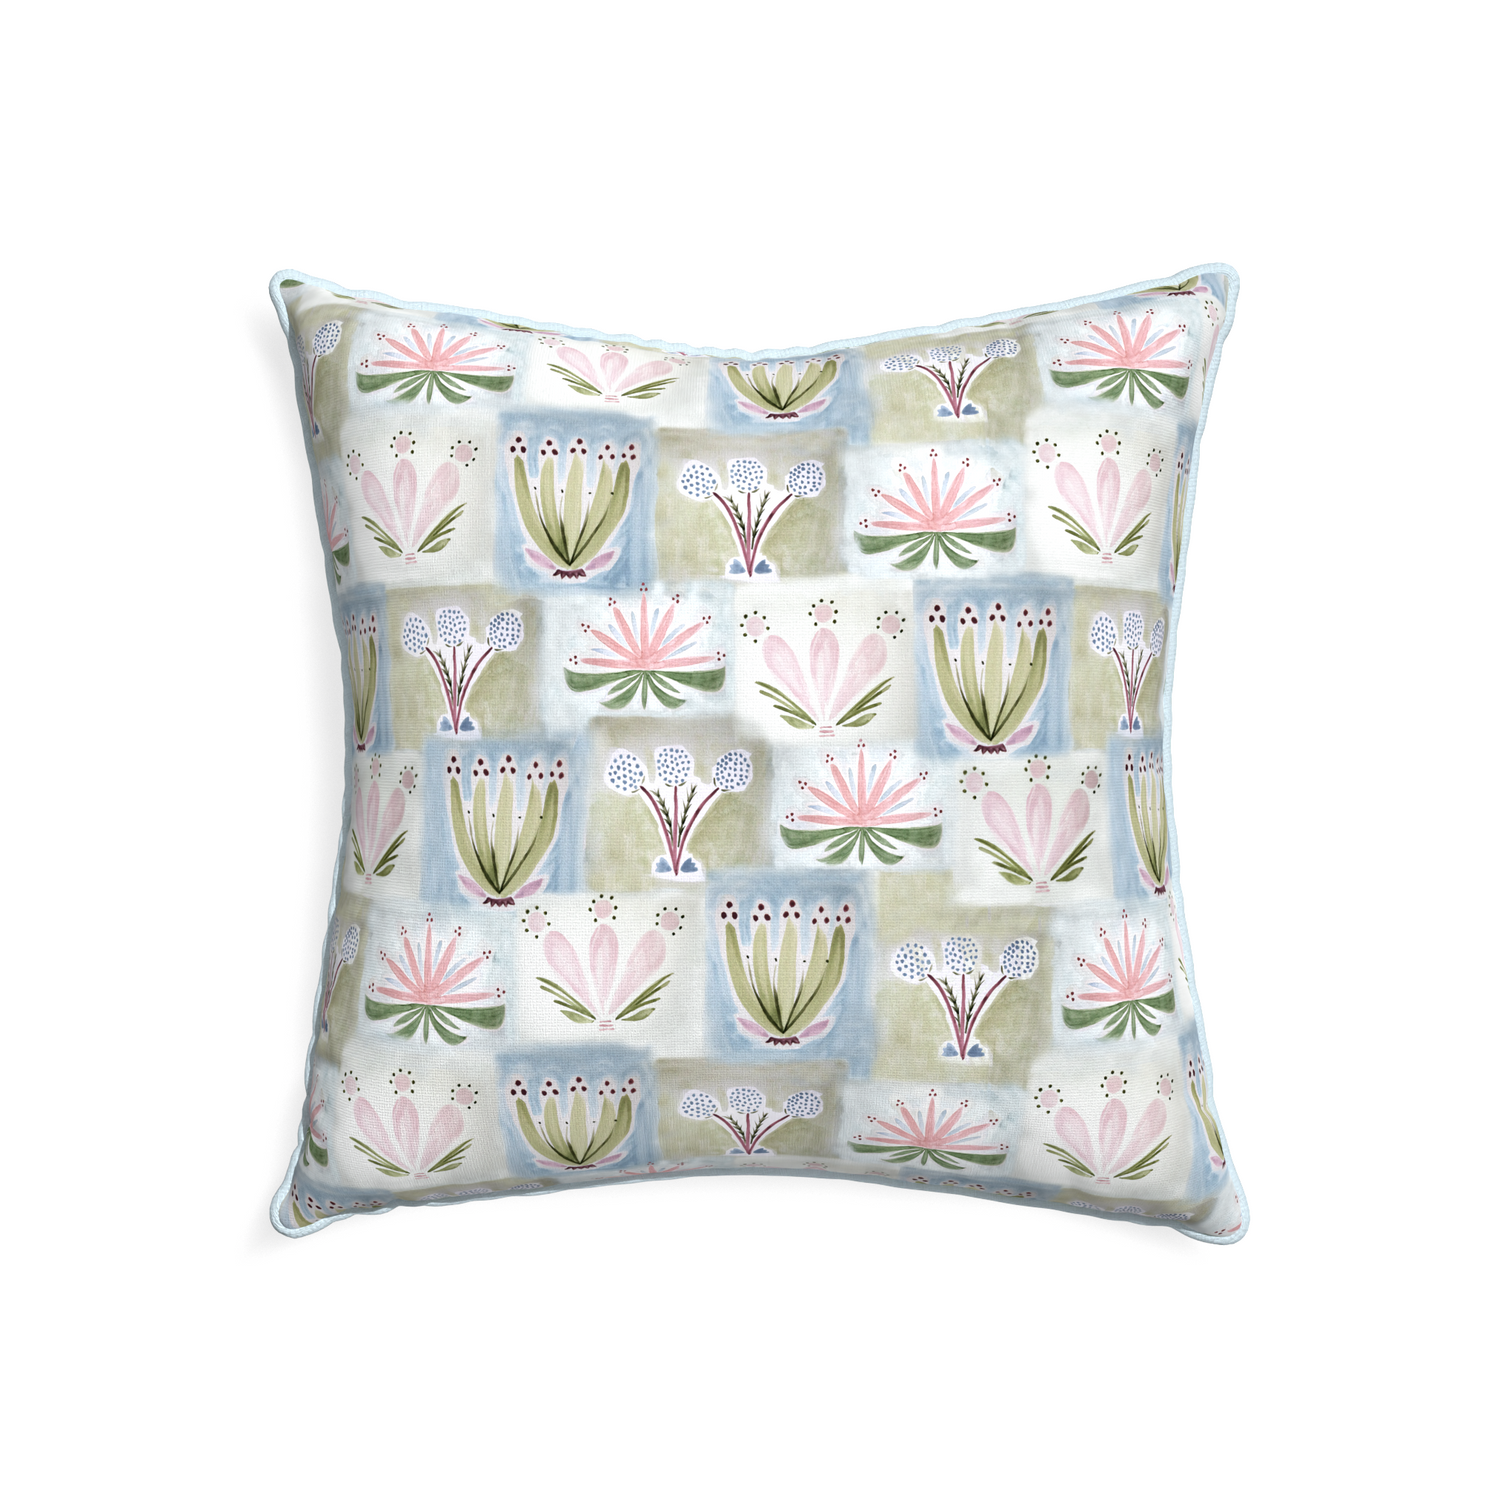 22-square harper custom hand-painted floralpillow with powder piping on white background